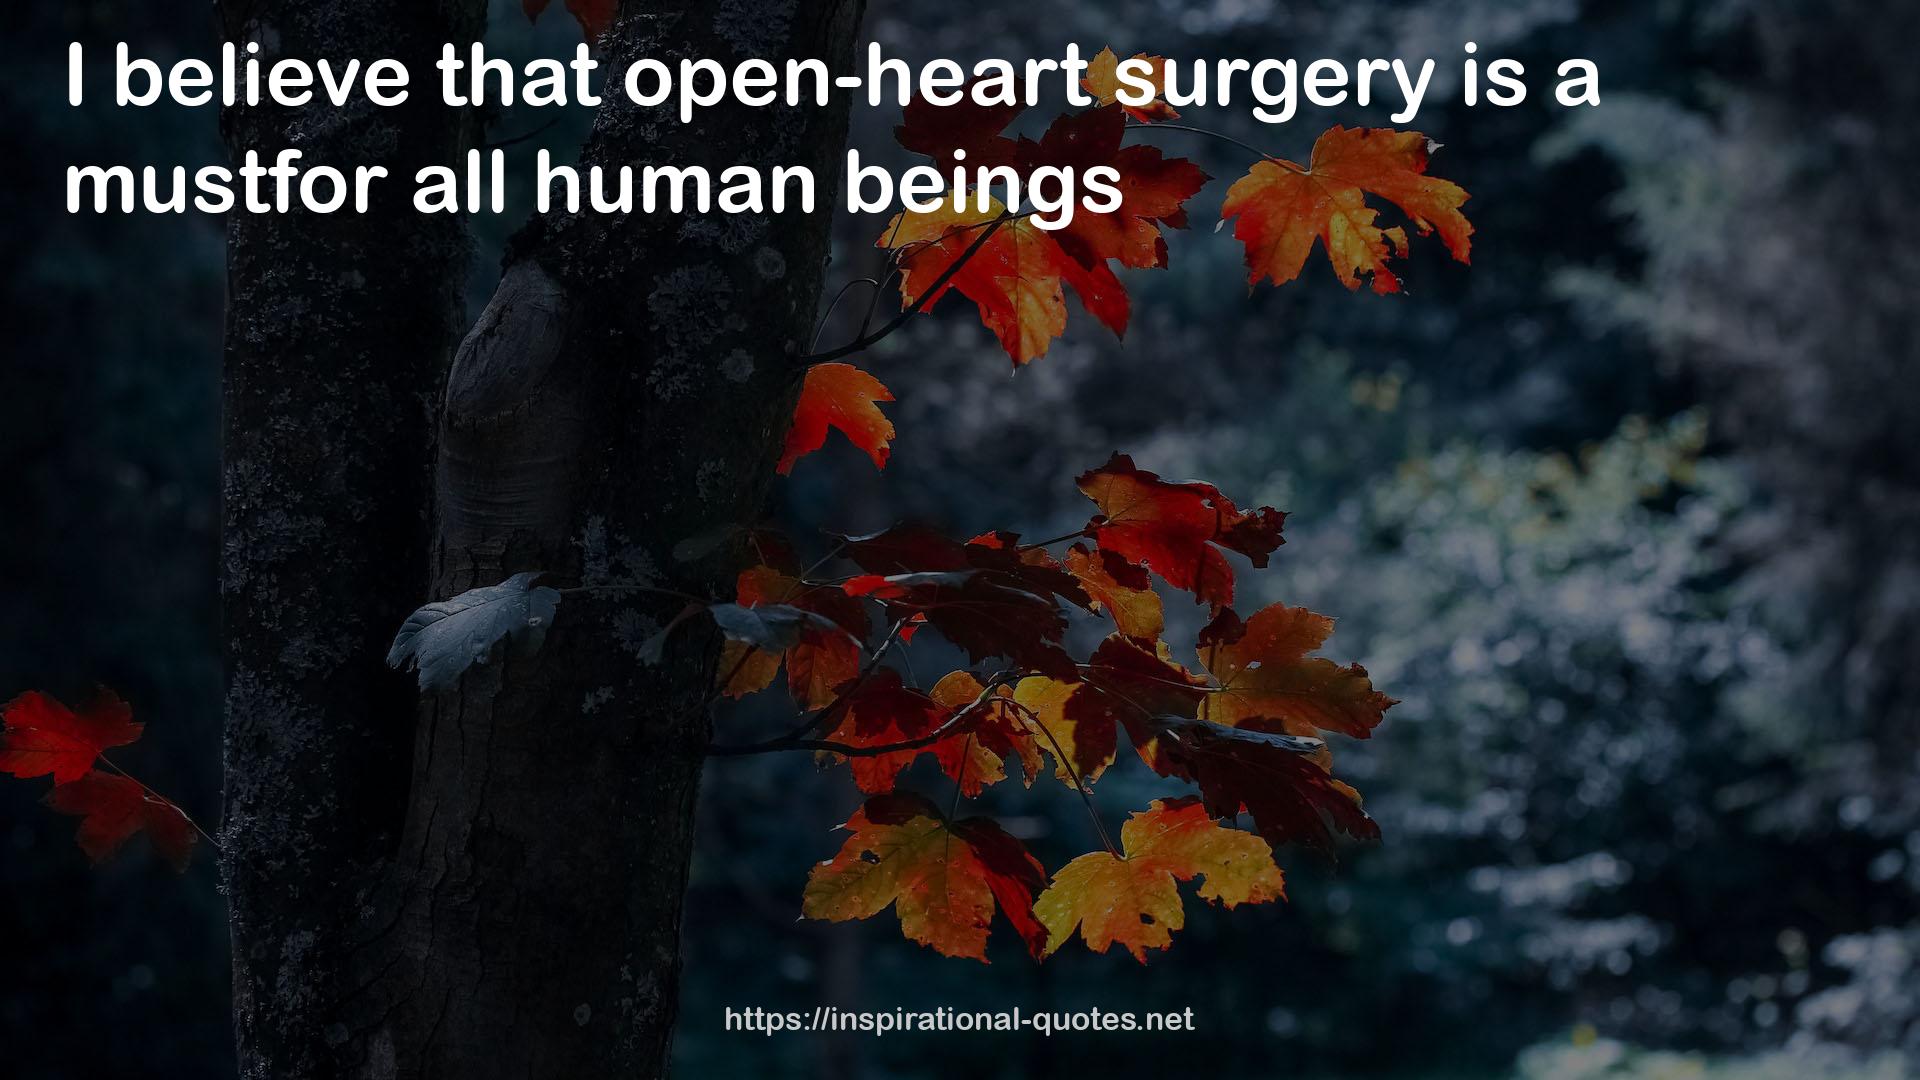 open-heart surgery  QUOTES